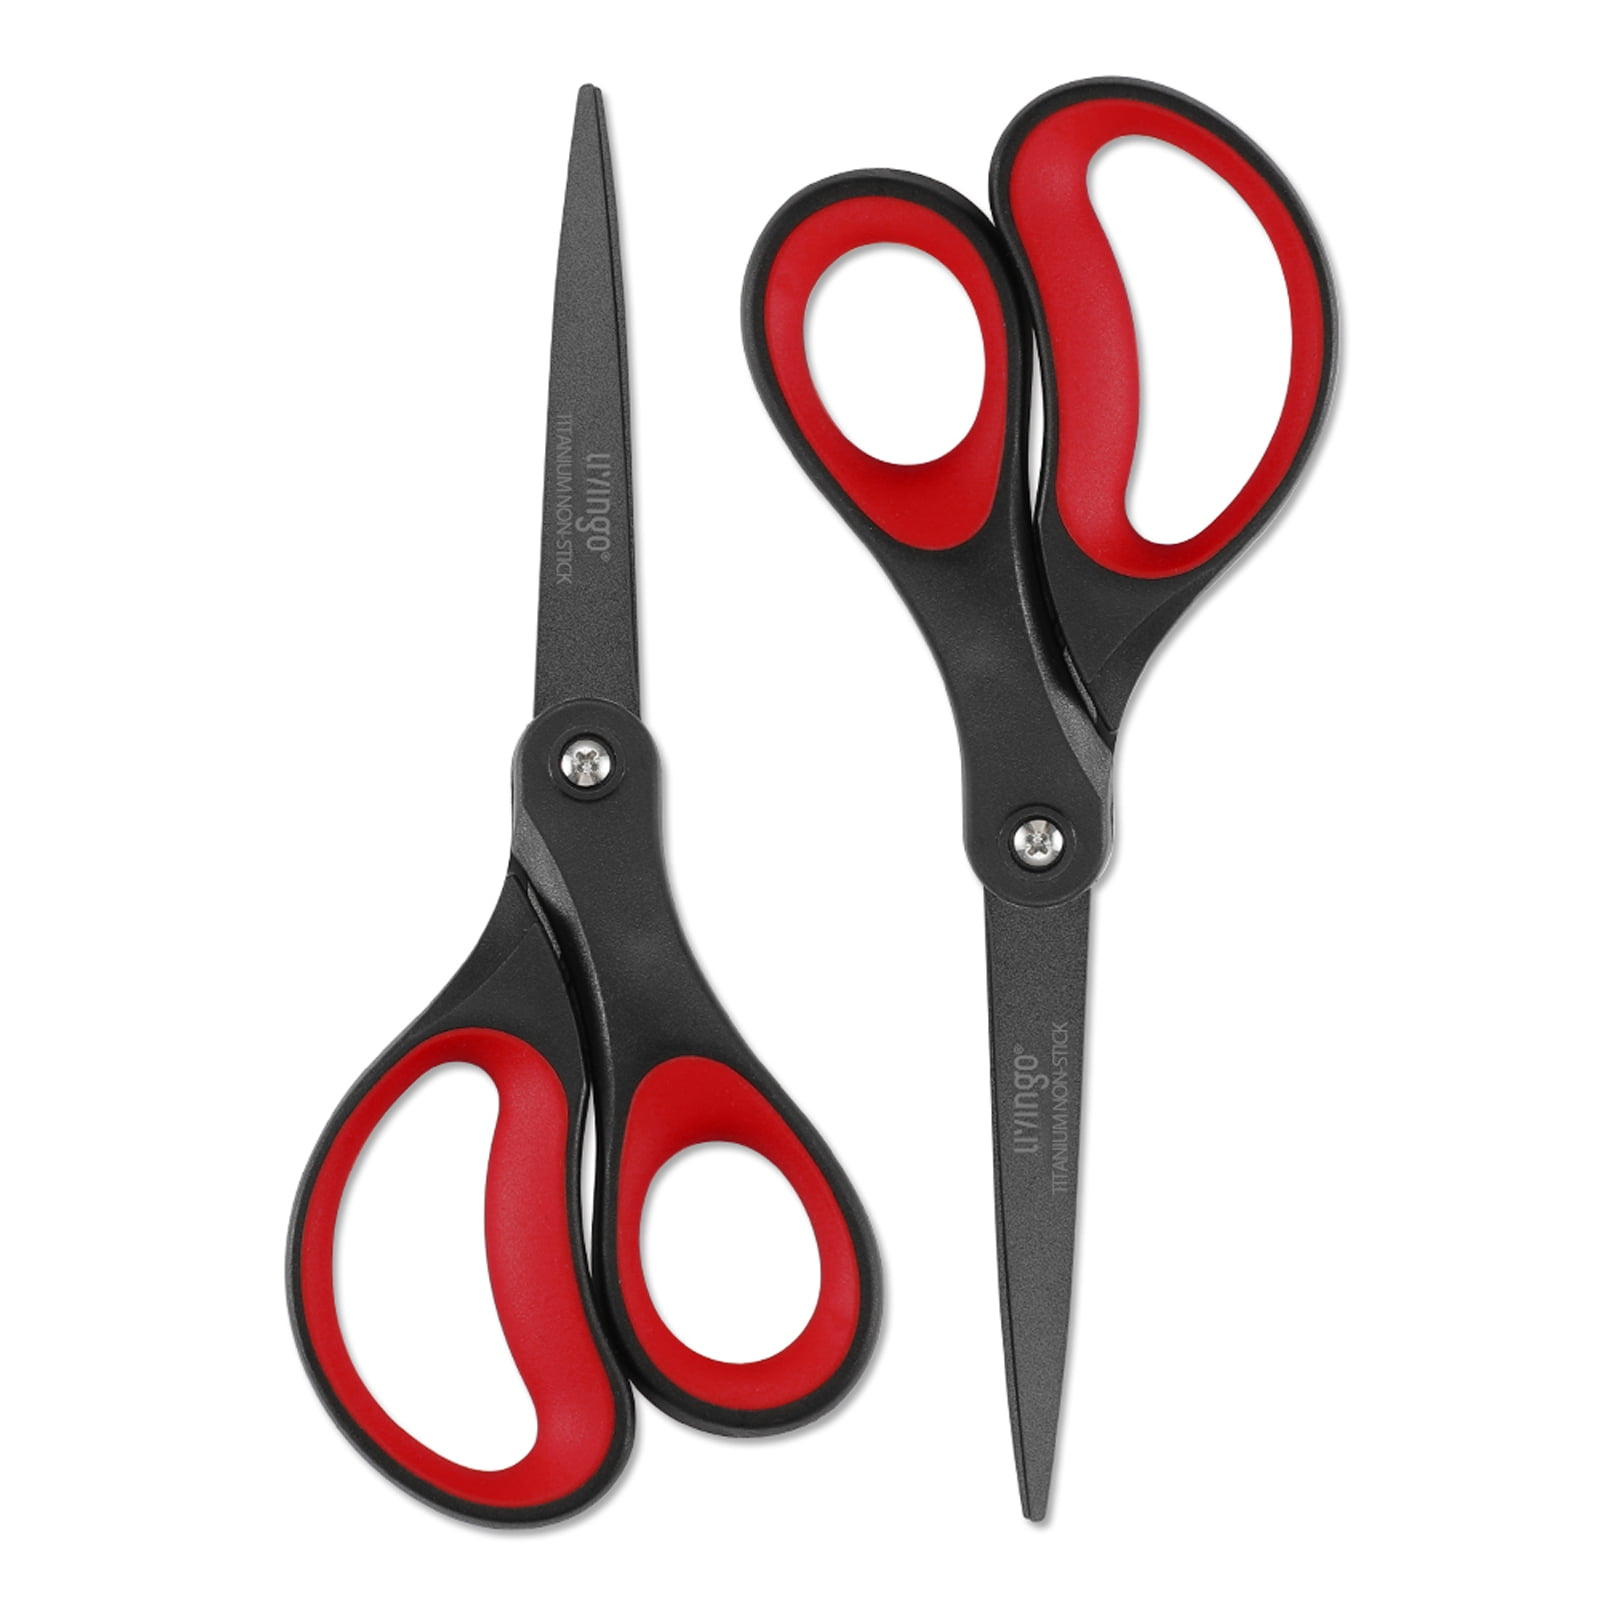 Scotch 1408ESF Scissors, 8 Household Scissors, Stainless Steel, 1 Pair, Red